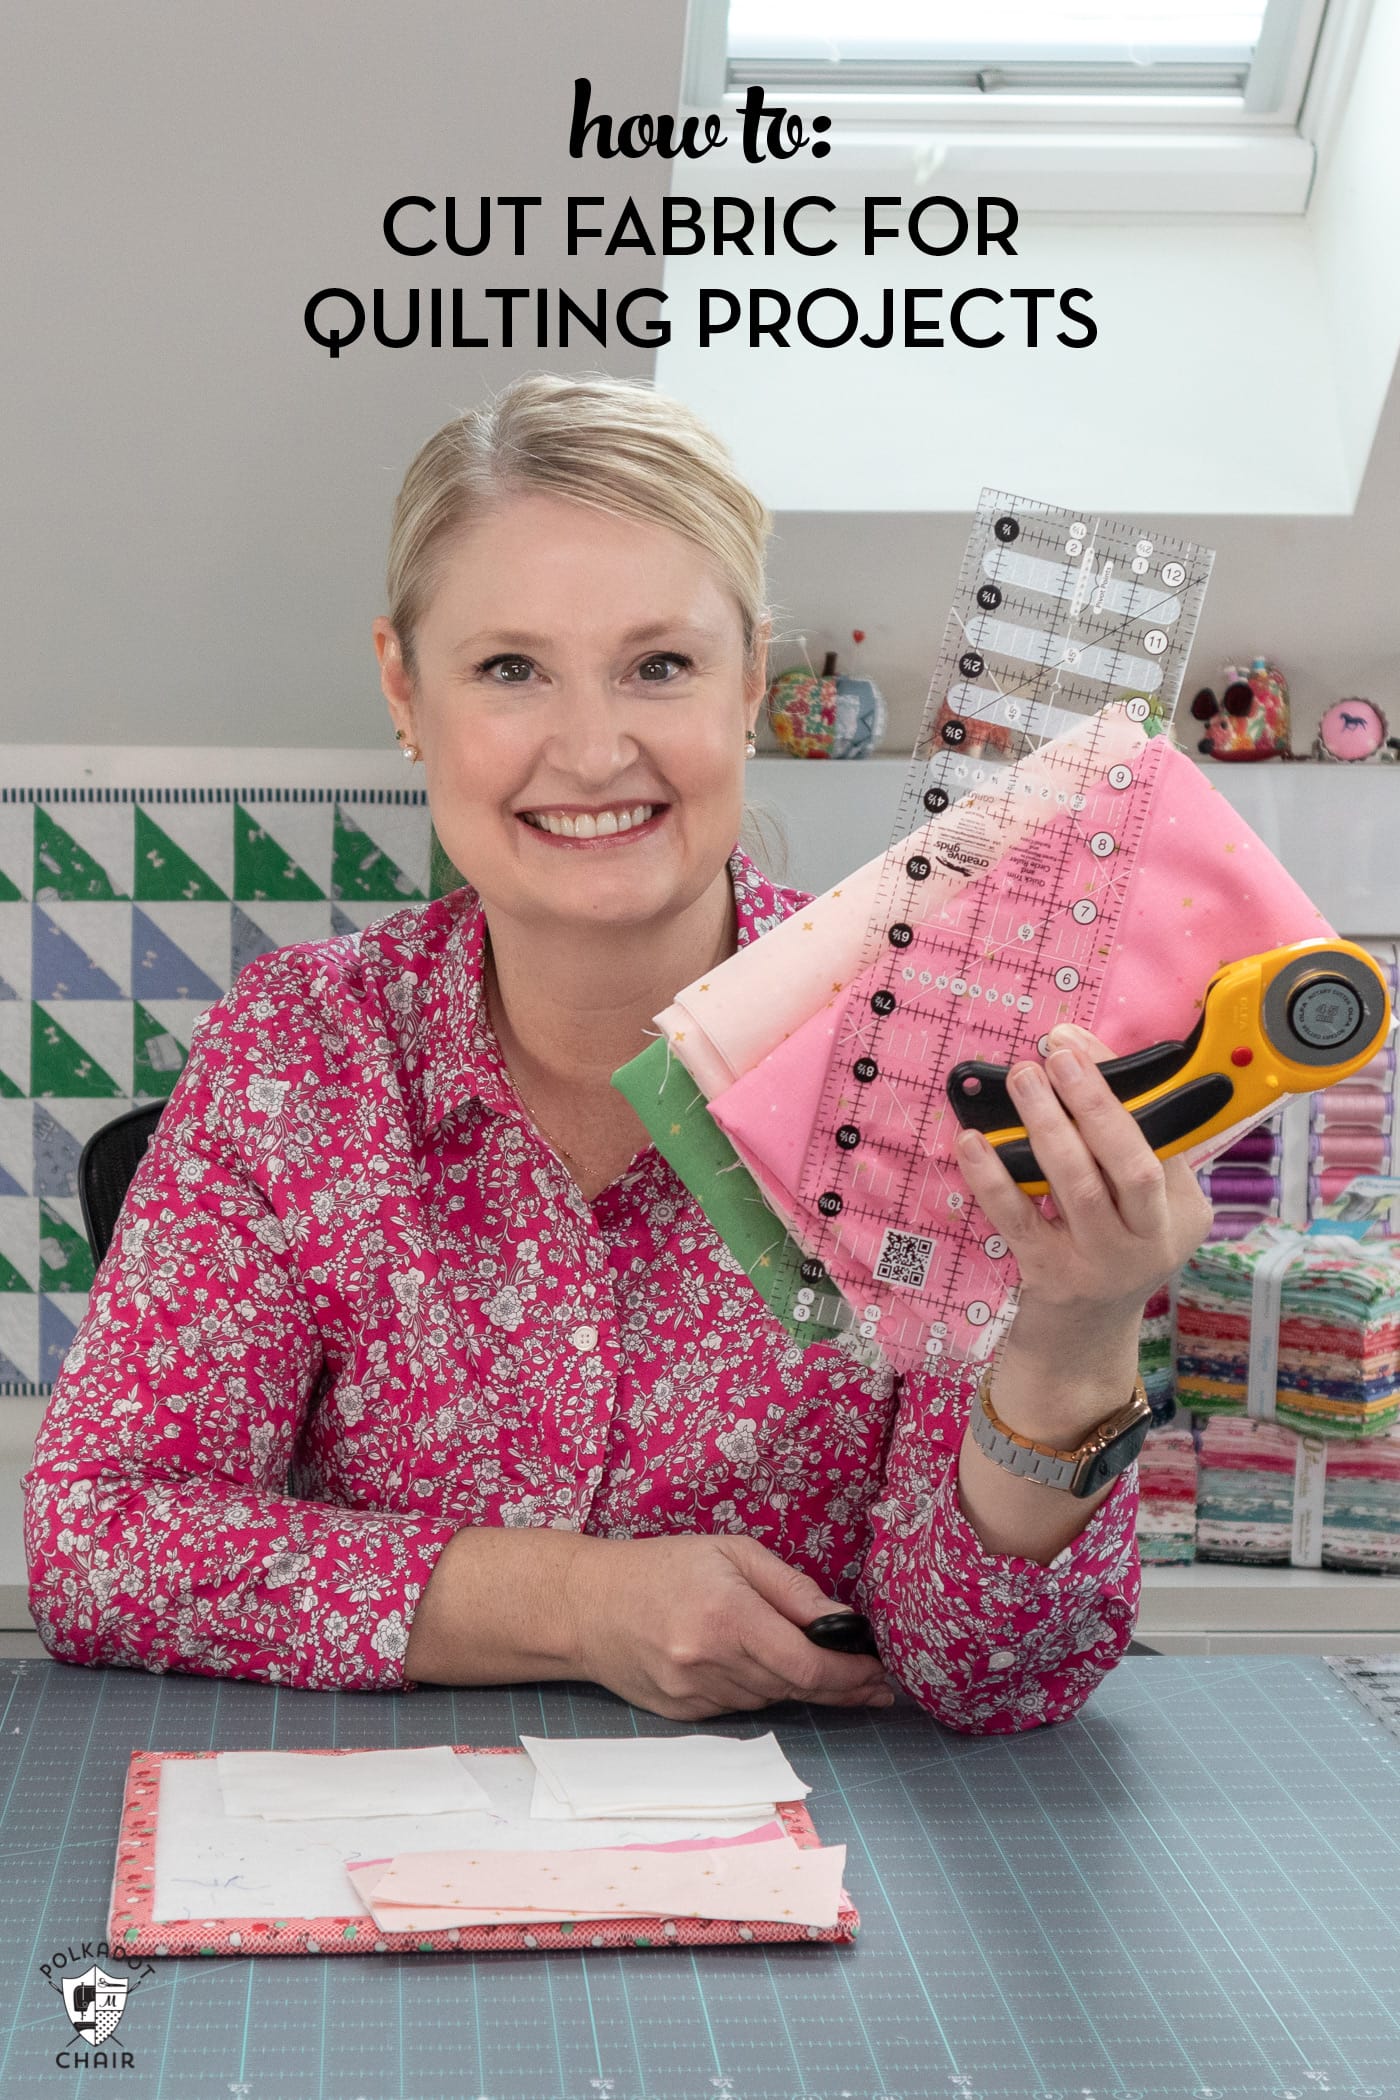 How to Cut Fabric with a Rotary Cutter for Quilting Projects - The